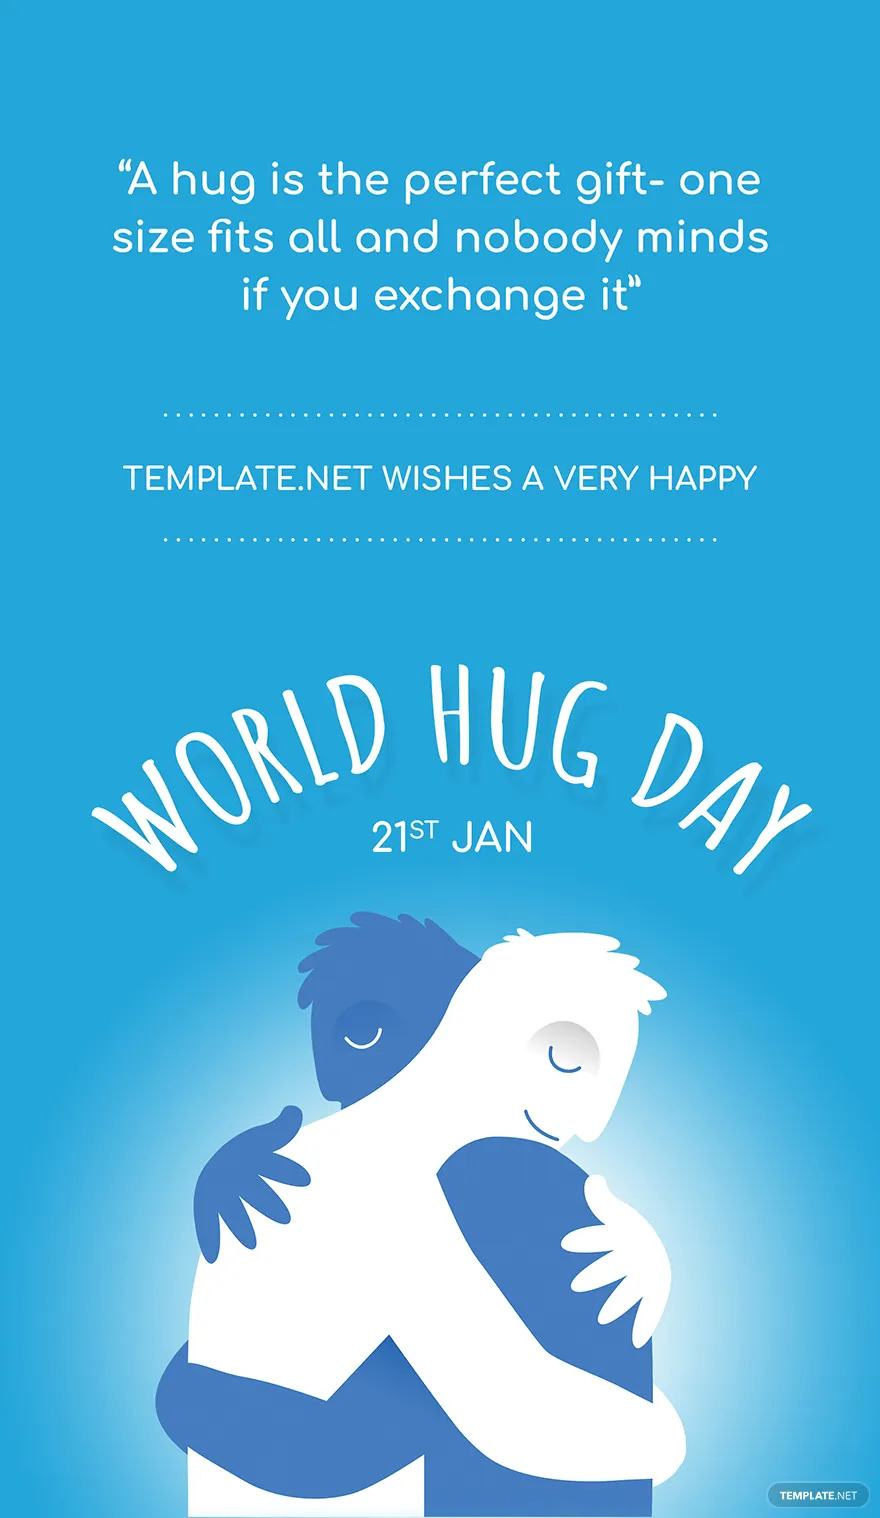 world hug day whatsapp images ideas and examples